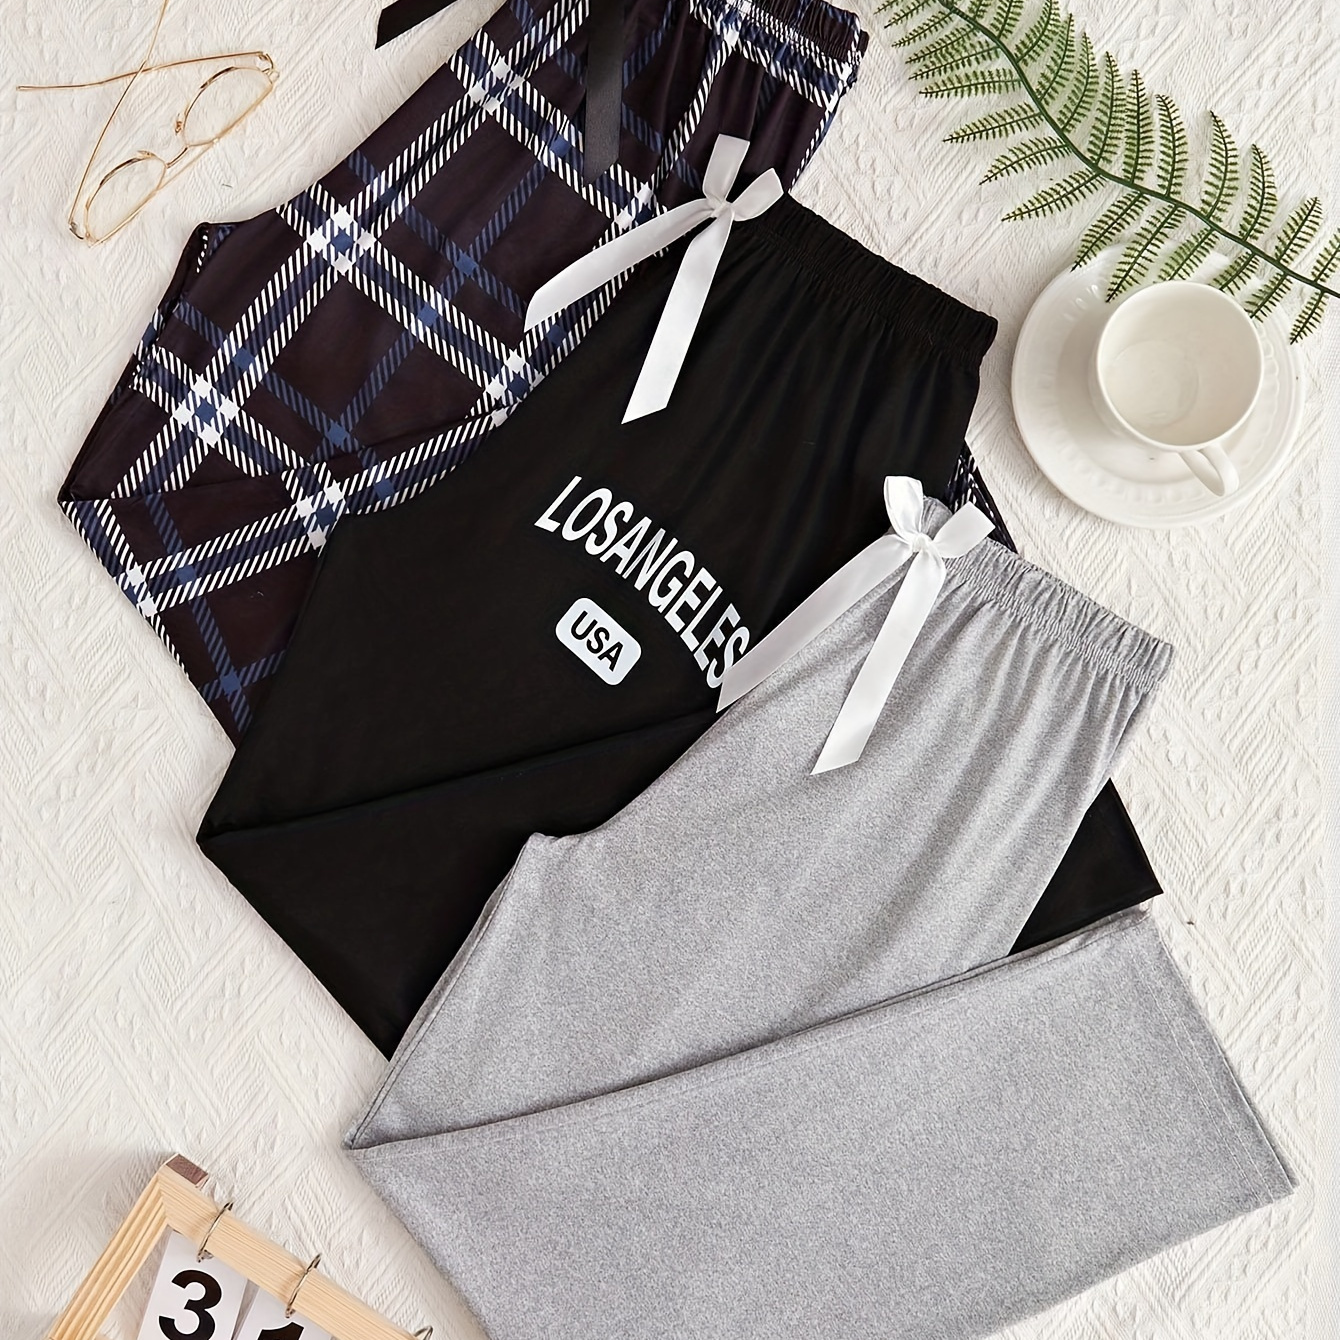 

3 Pcs Plaid & Letter Print Pajama Bottoms, Casual Bow Elastic Stretchy Loose Fit Pants, Women's Sleepwear